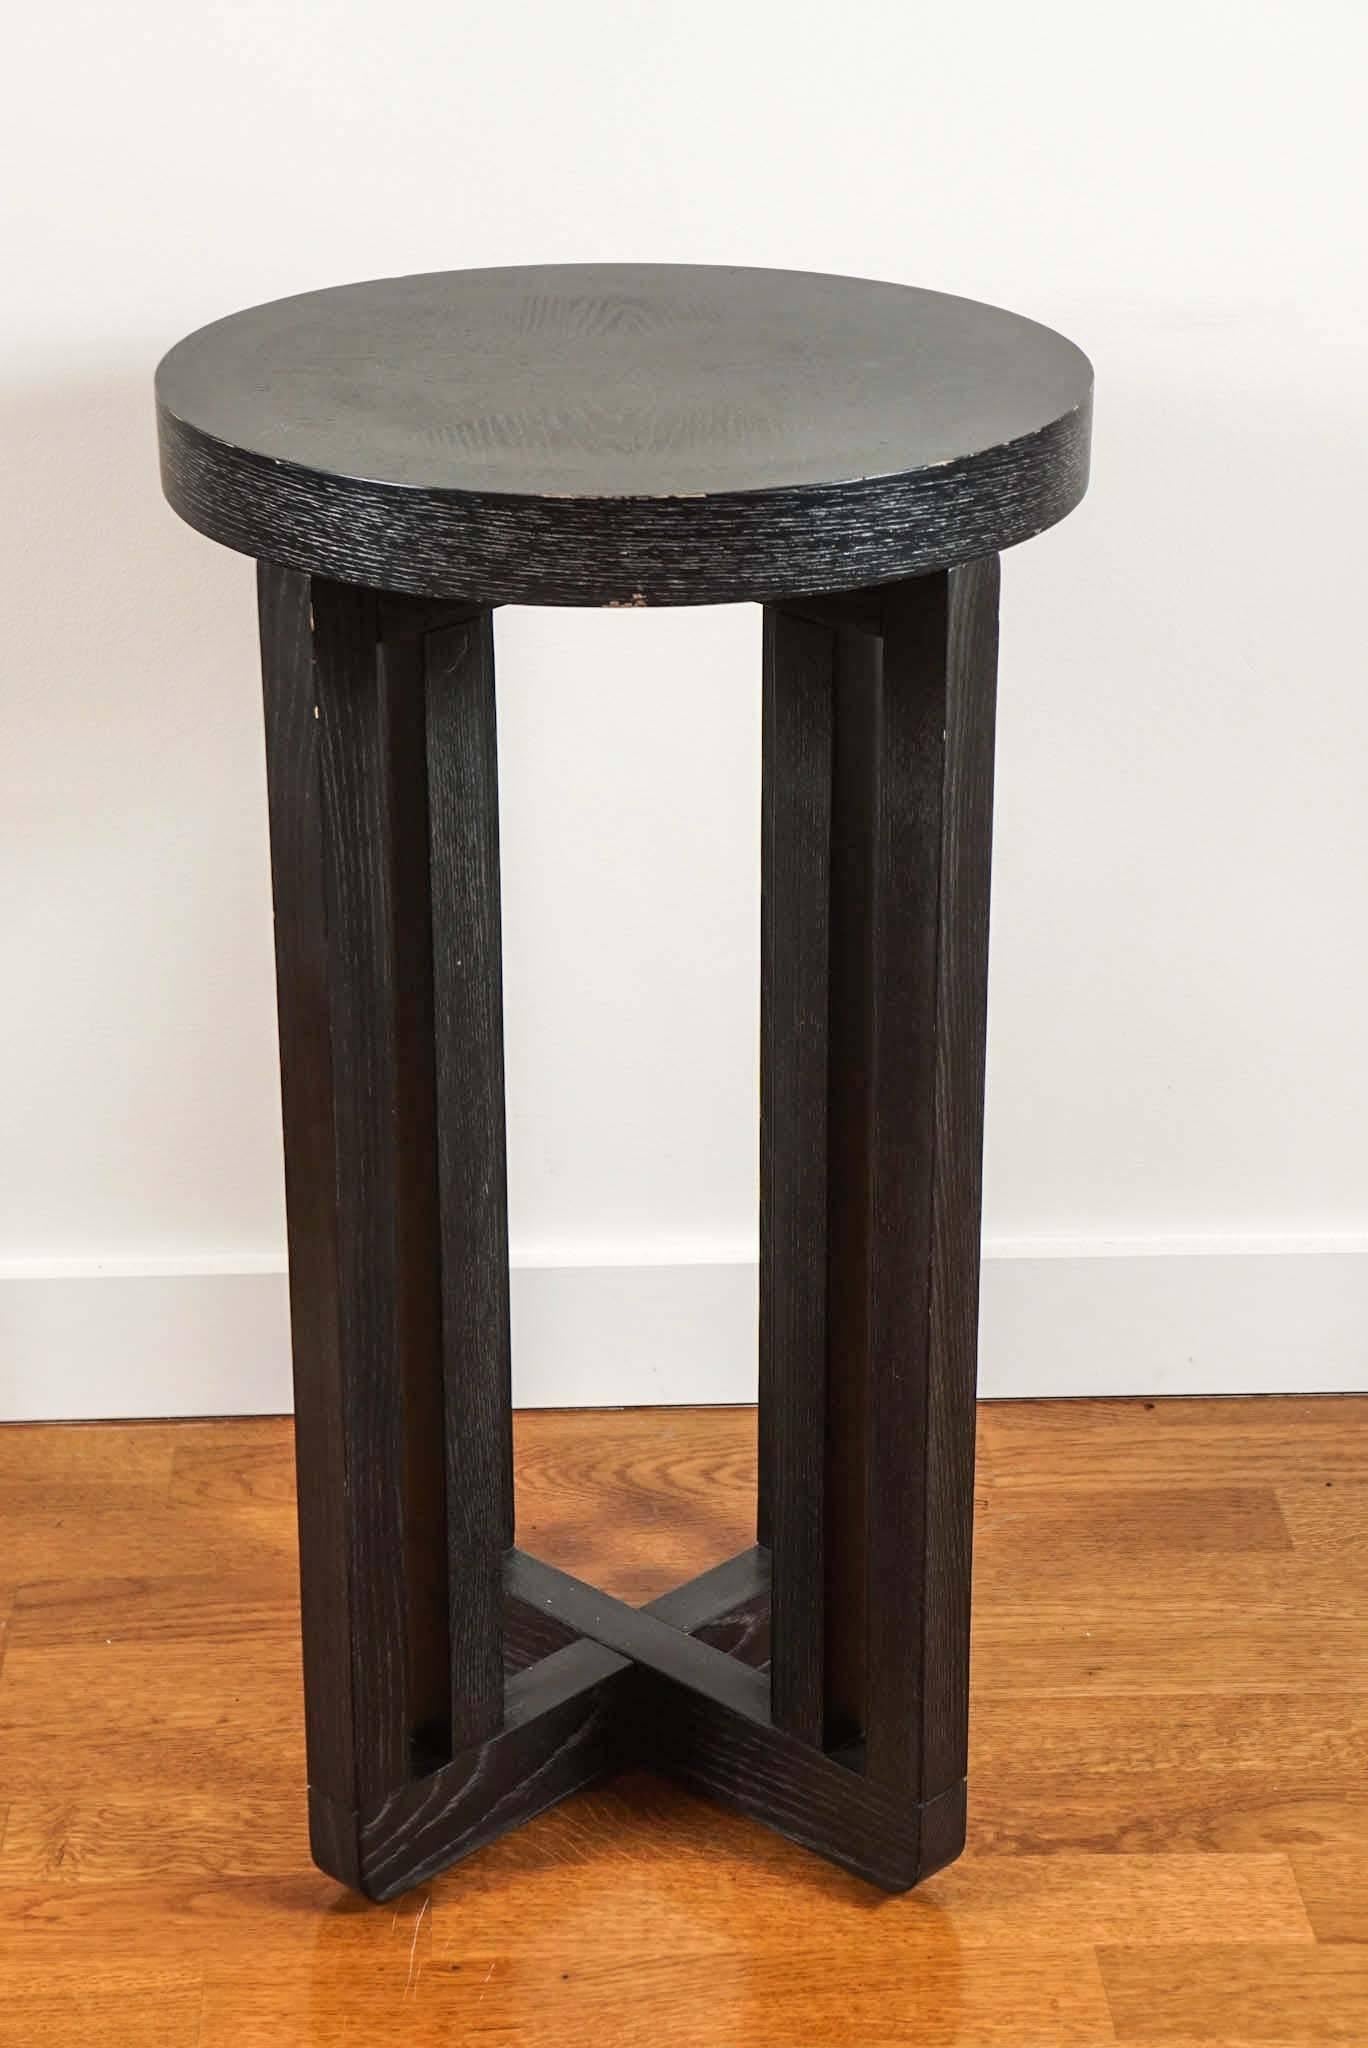 20th century, ebonized oak, secessionist table with an interesting grain design on the table top.